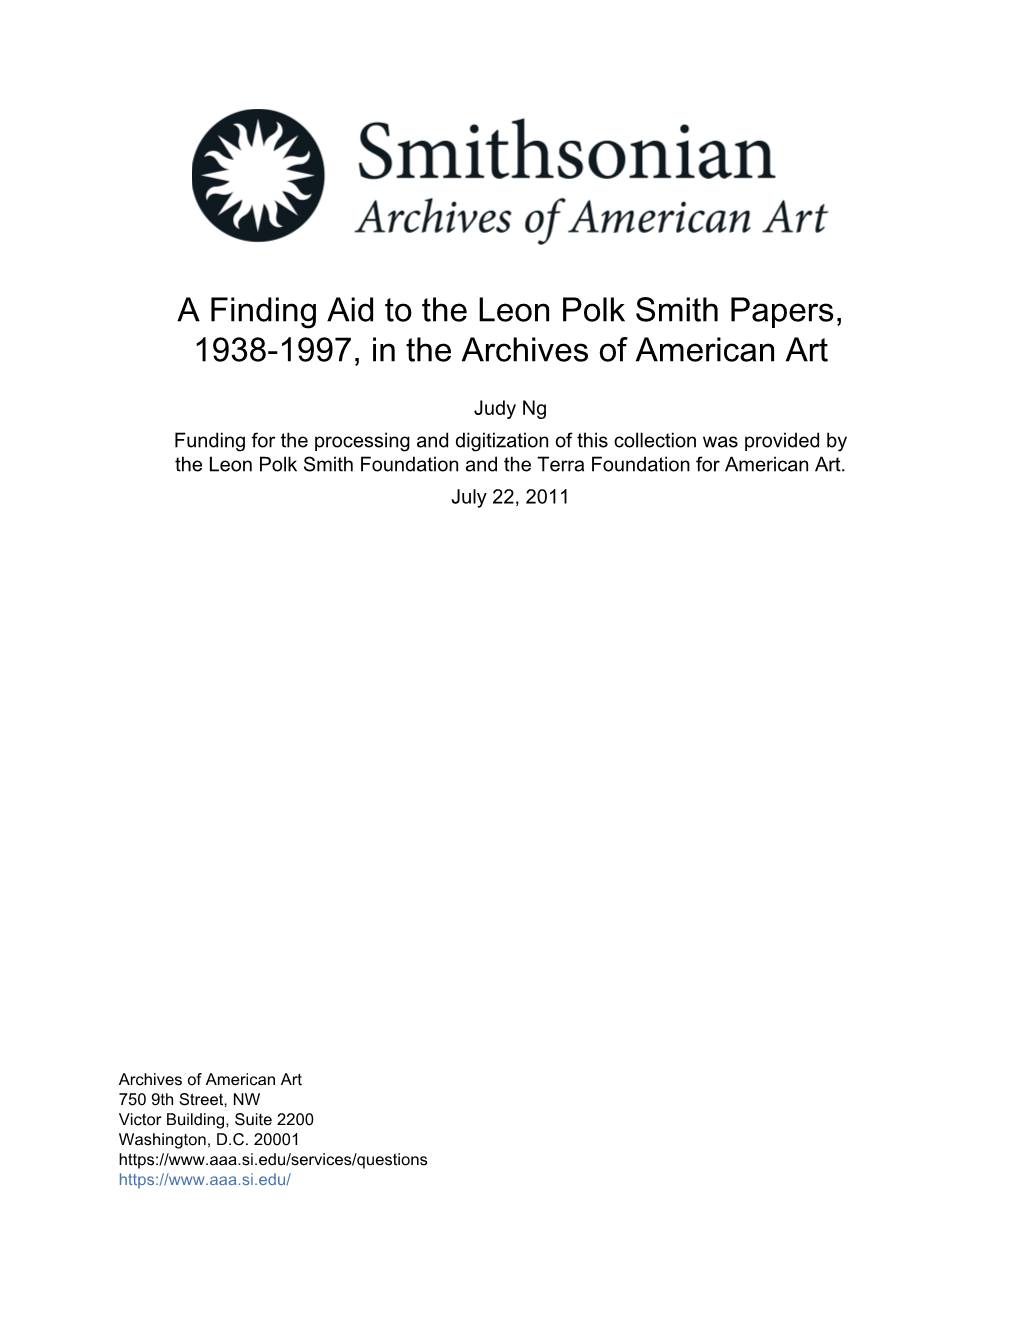 A Finding Aid to the Leon Polk Smith Papers, 1938-1997, in the Archives of American Art